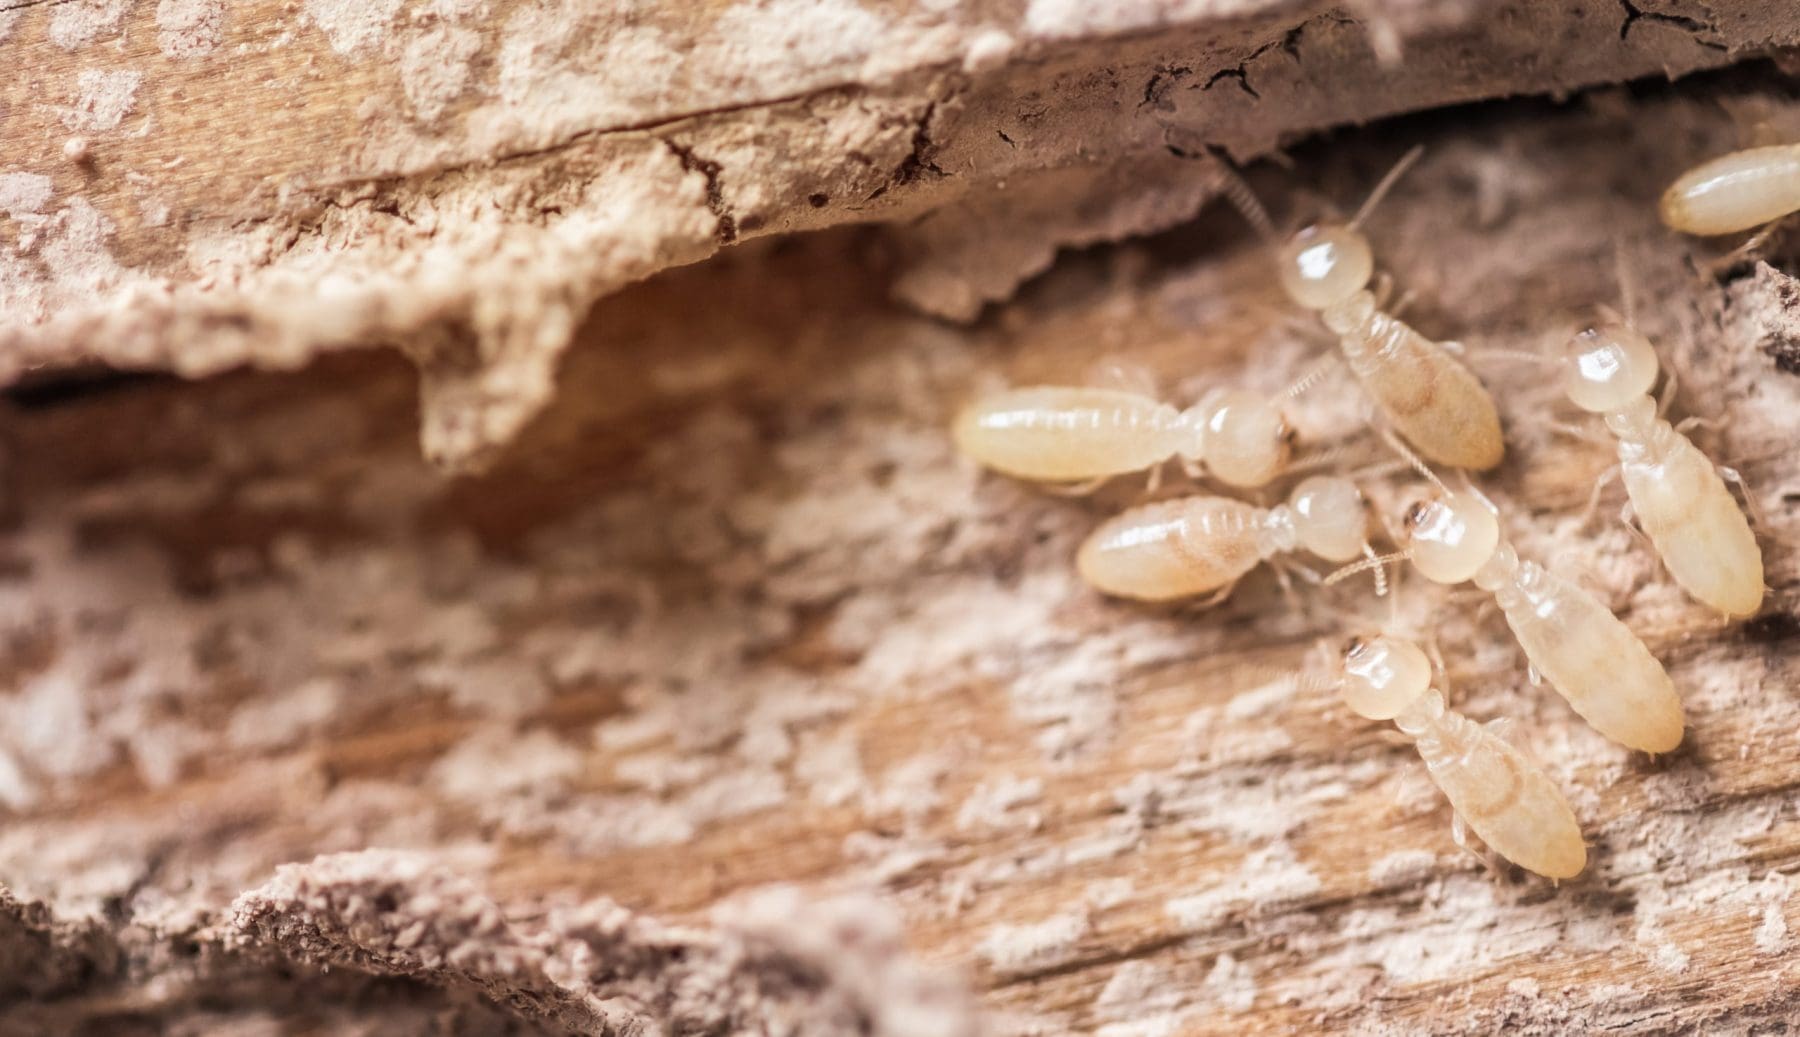 Close up of termites on decomposing wood.